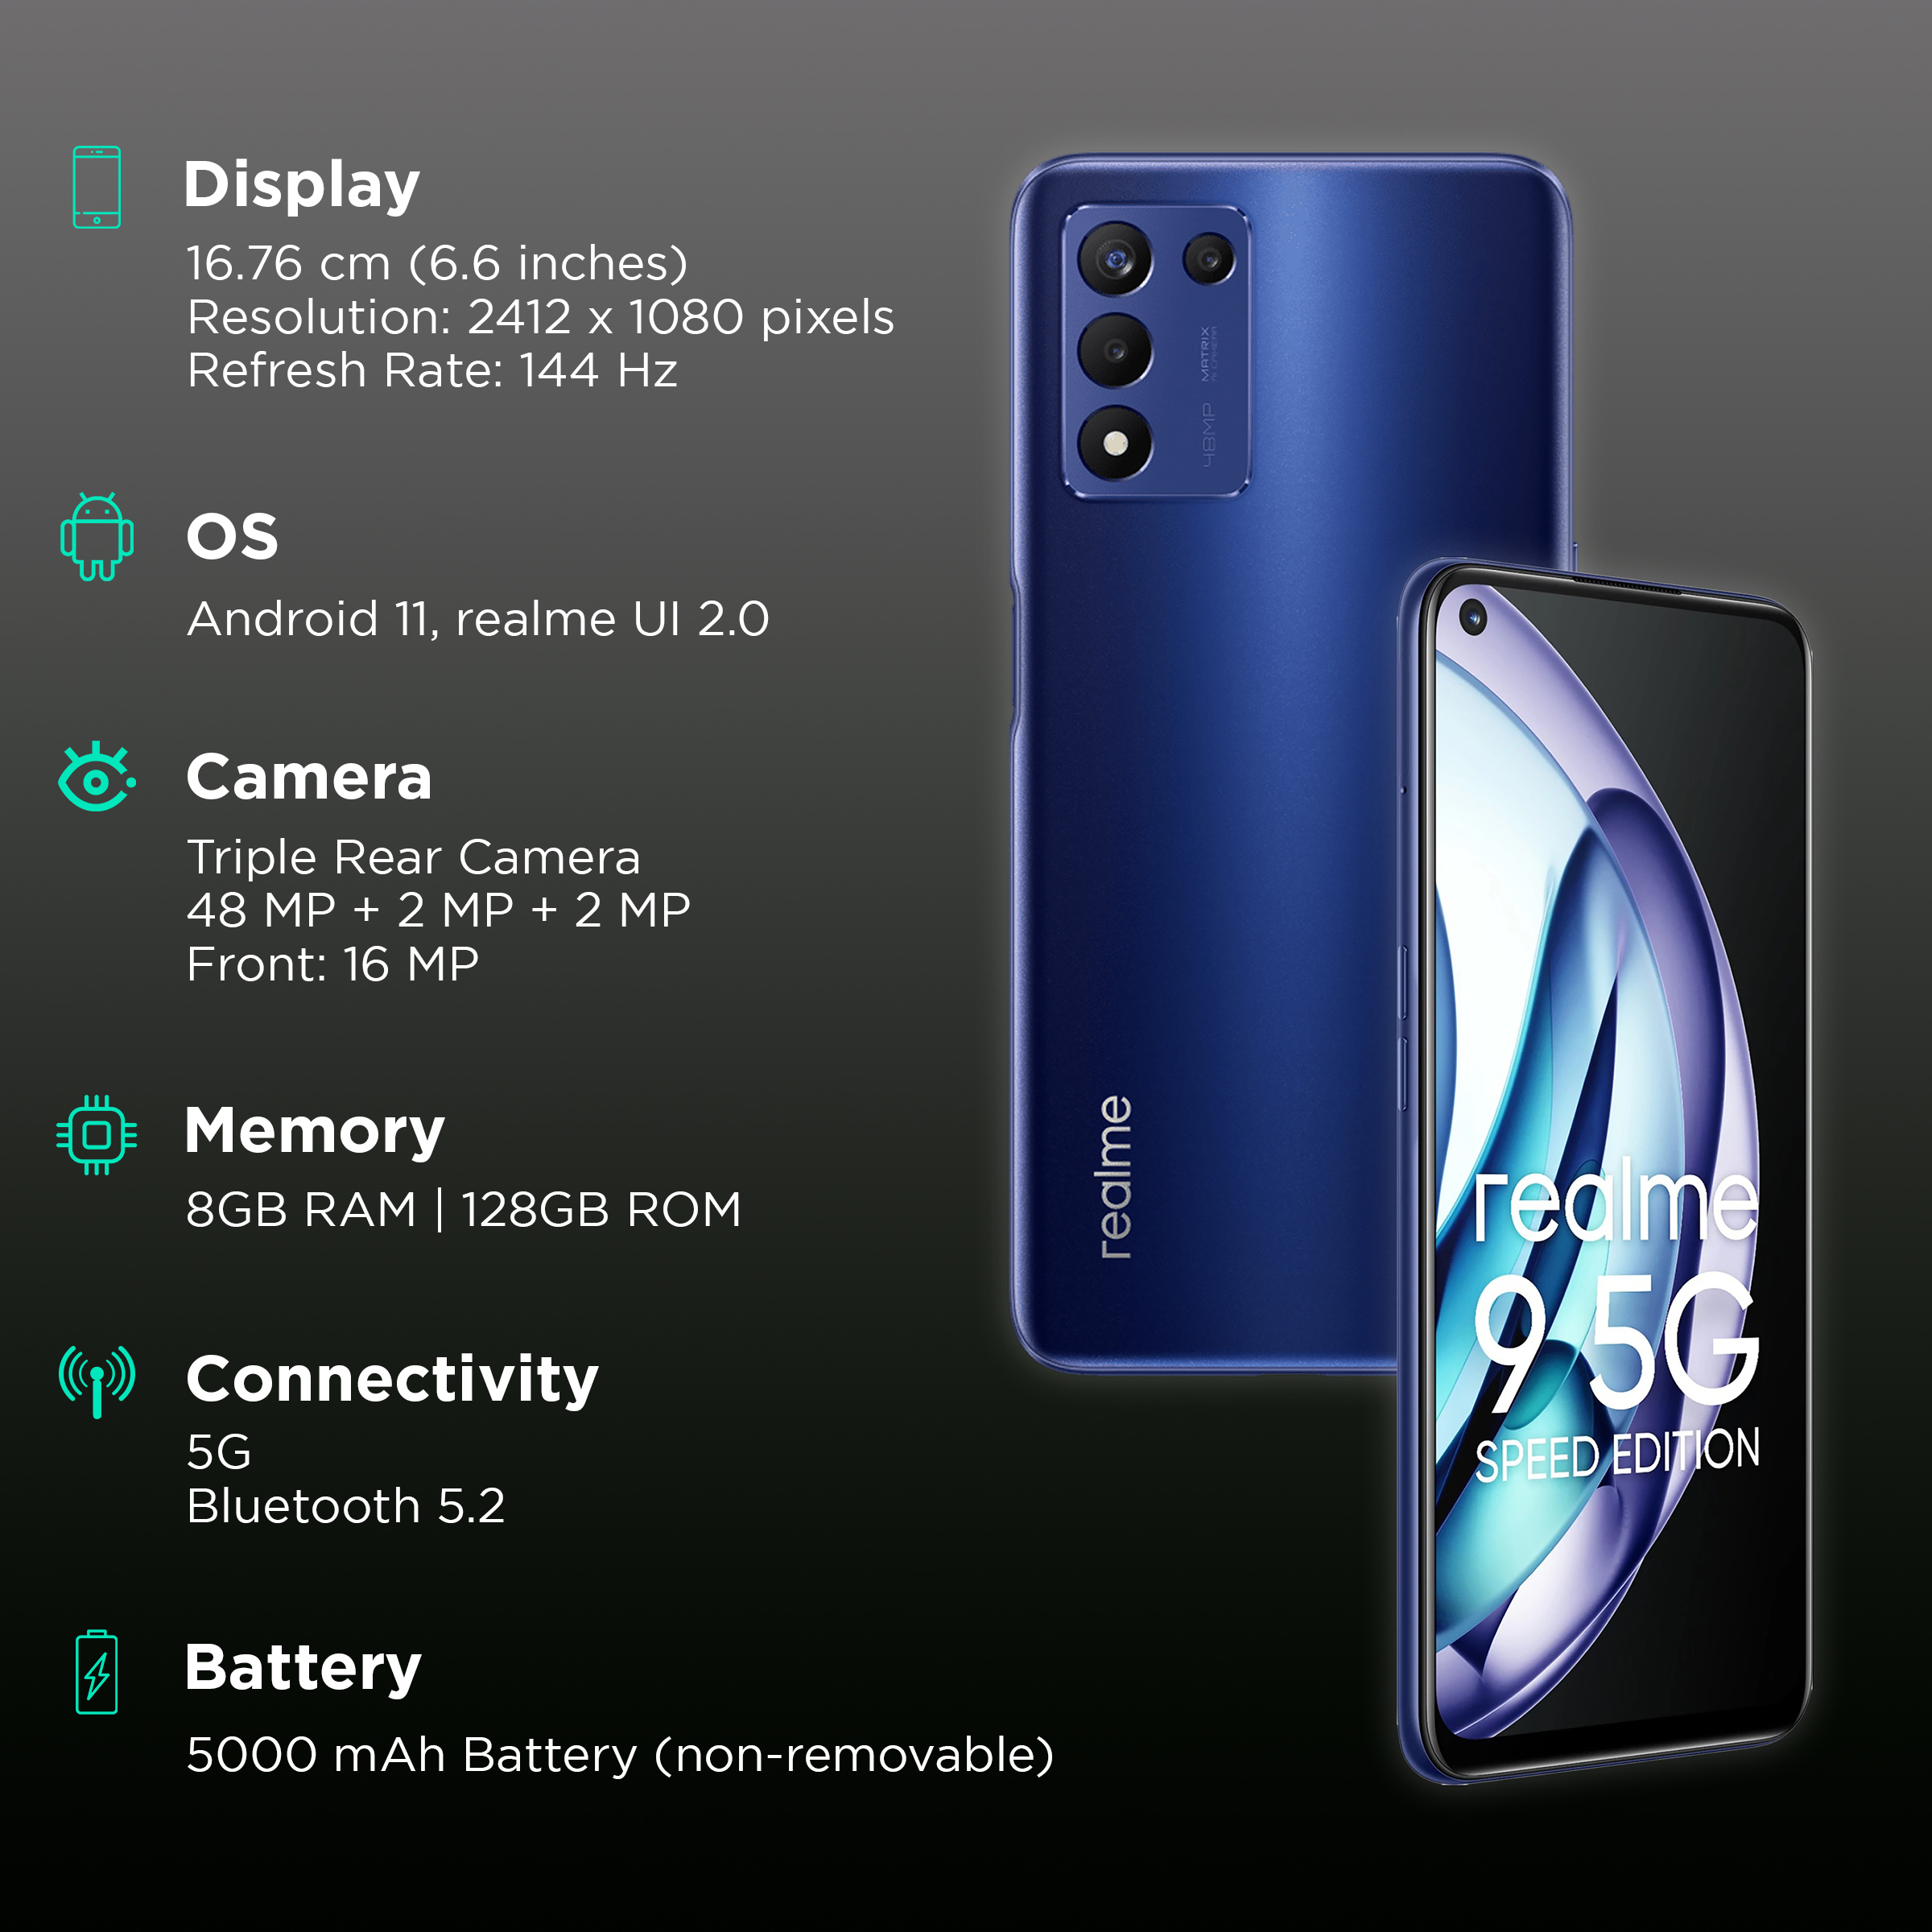 Buy Realme 9 5G Speed Edition 128 GB, 8 GB RAM, Starry Glow, Mobile Phone  Online at Best Prices in India - JioMart.